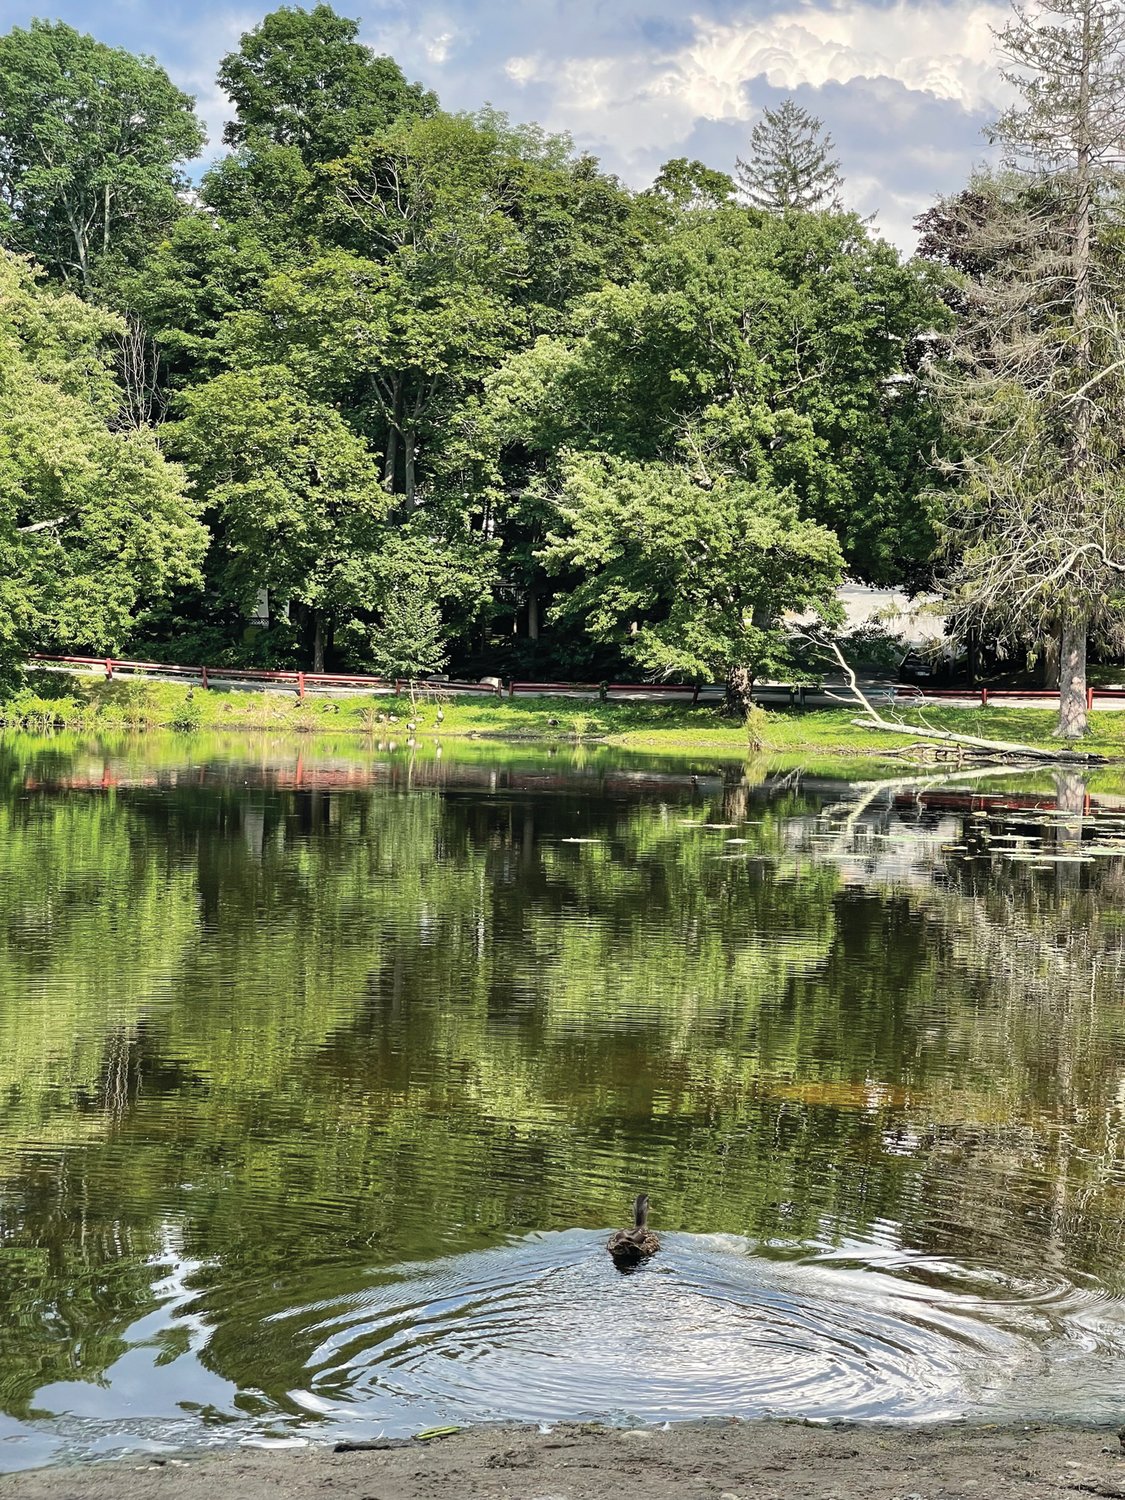 FLOATING ALONG: A duck floats onto Meshanticut Pond over the summer. Visible in the background are a fallen branch in the shallow water and a portion of the loop that surrounds the pond.